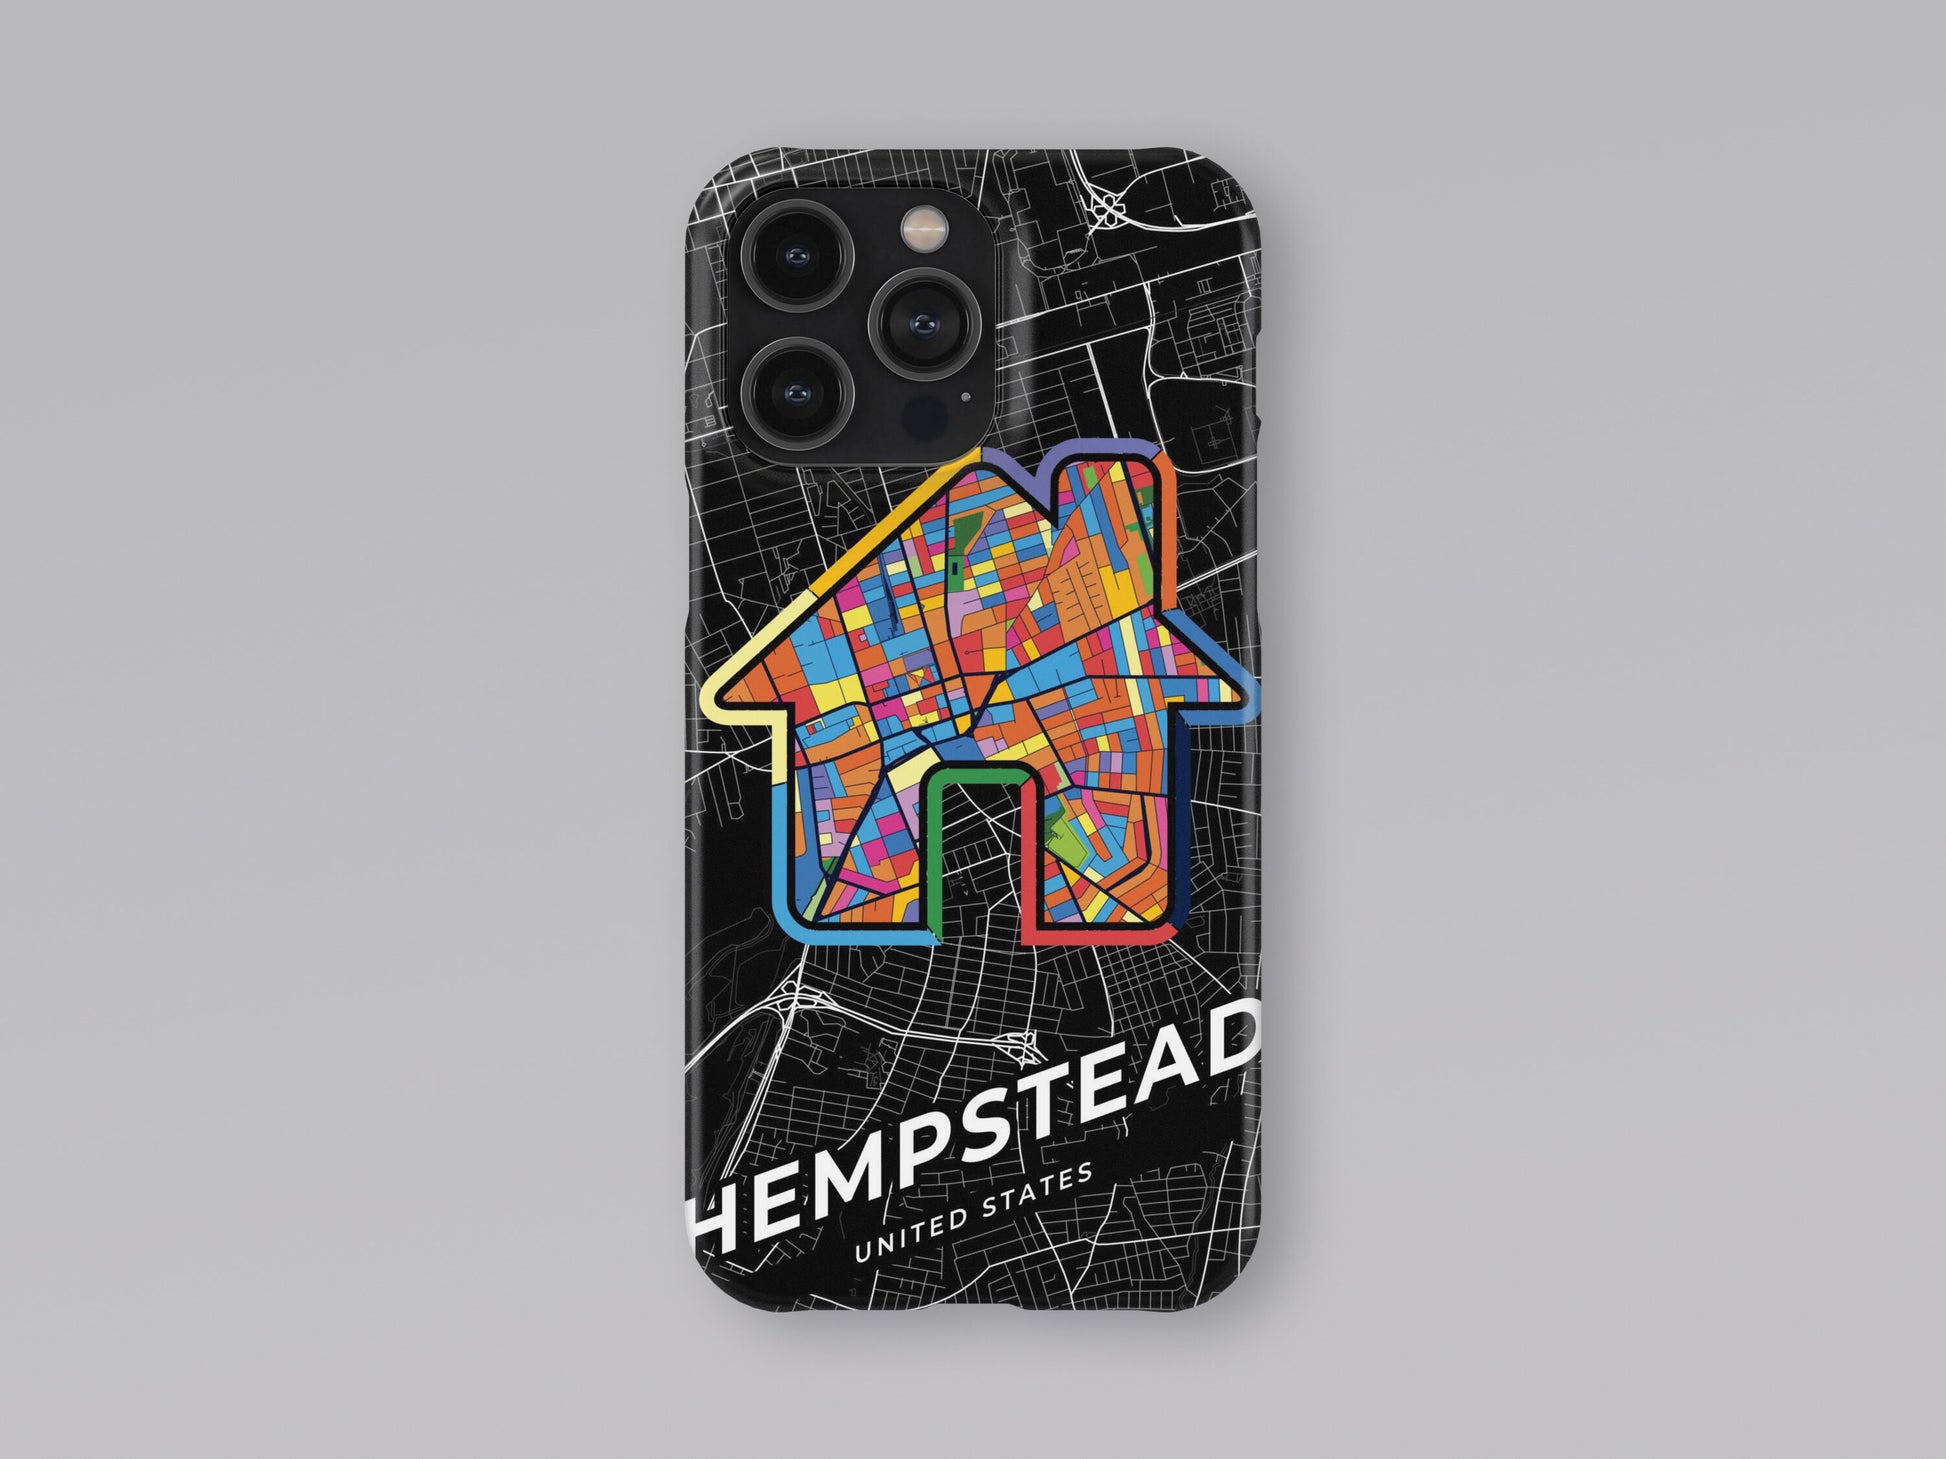 Hempstead New York slim phone case with colorful icon. Birthday, wedding or housewarming gift. Couple match cases. 3